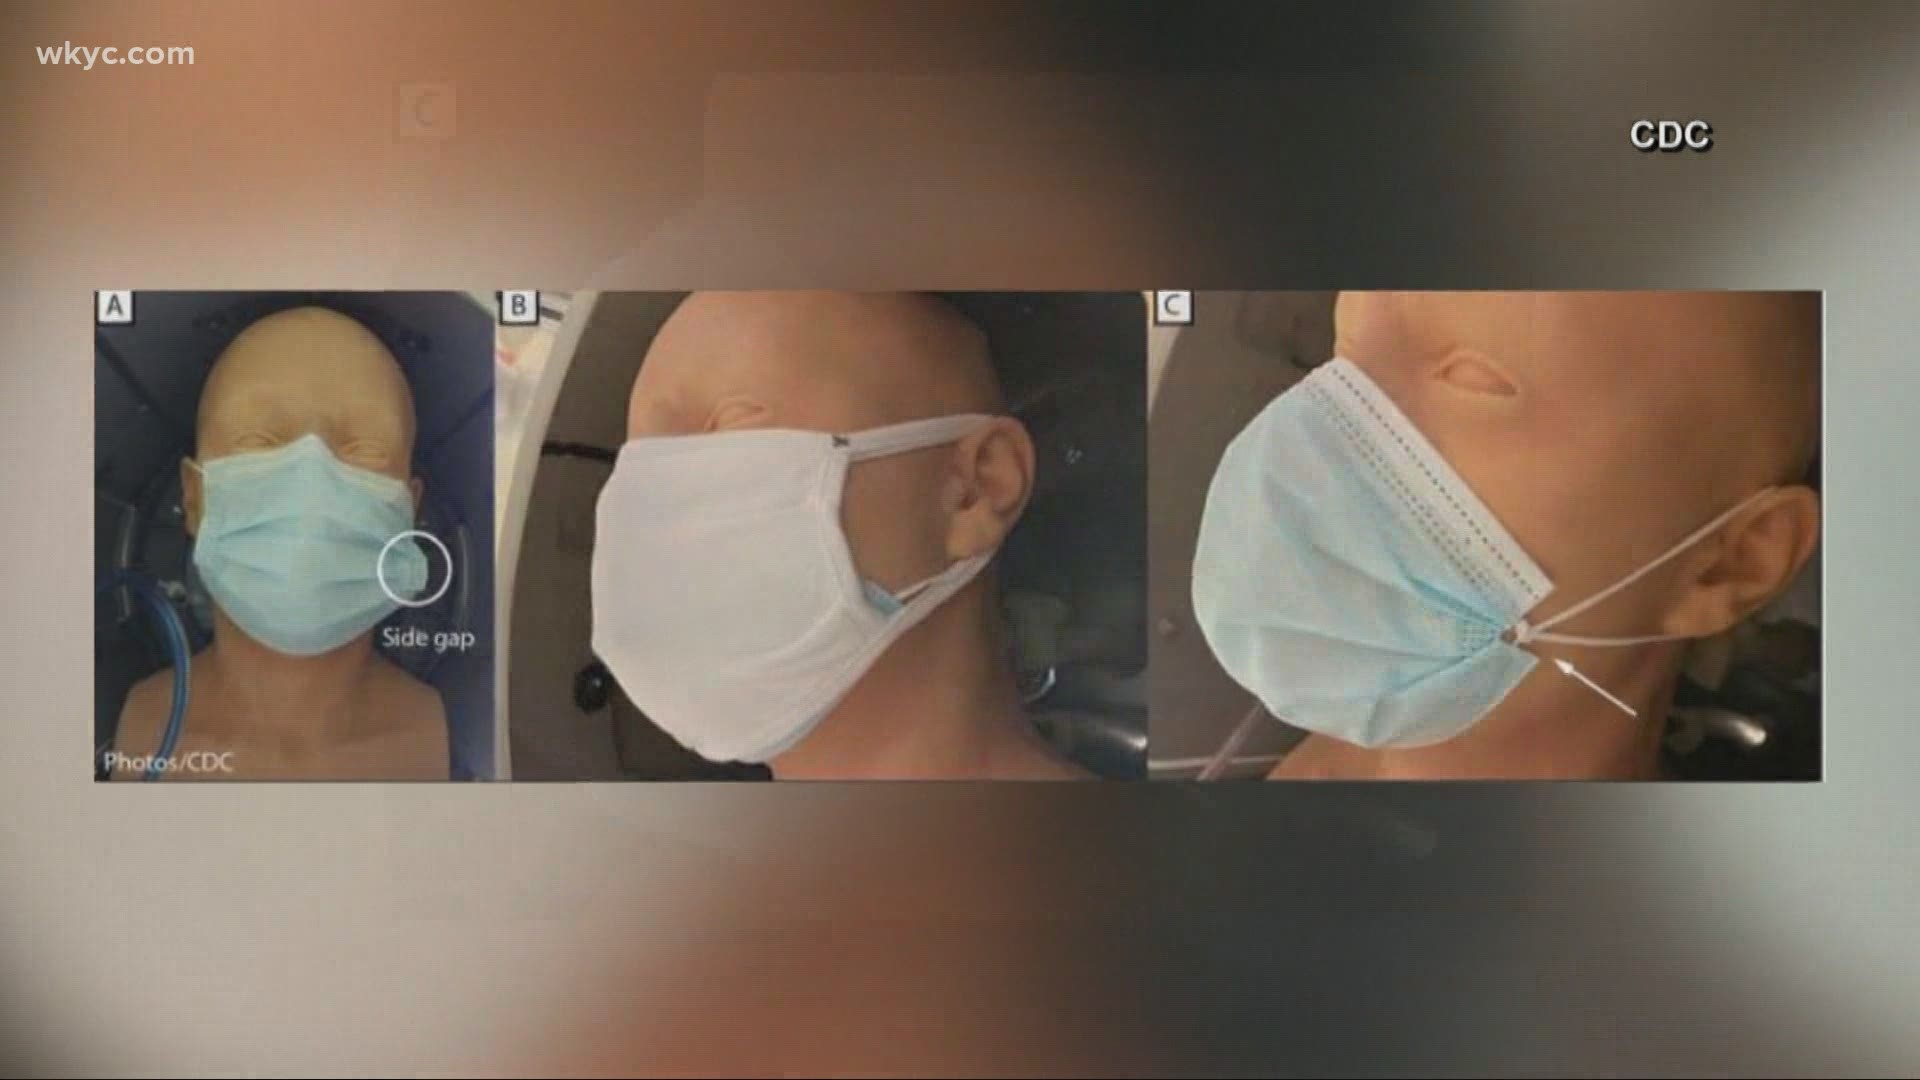 2 masks is better than one when it comes to preventing the spread of coronavirus. That's according to a new study released by the CDC today. Brandon Simmons reports.